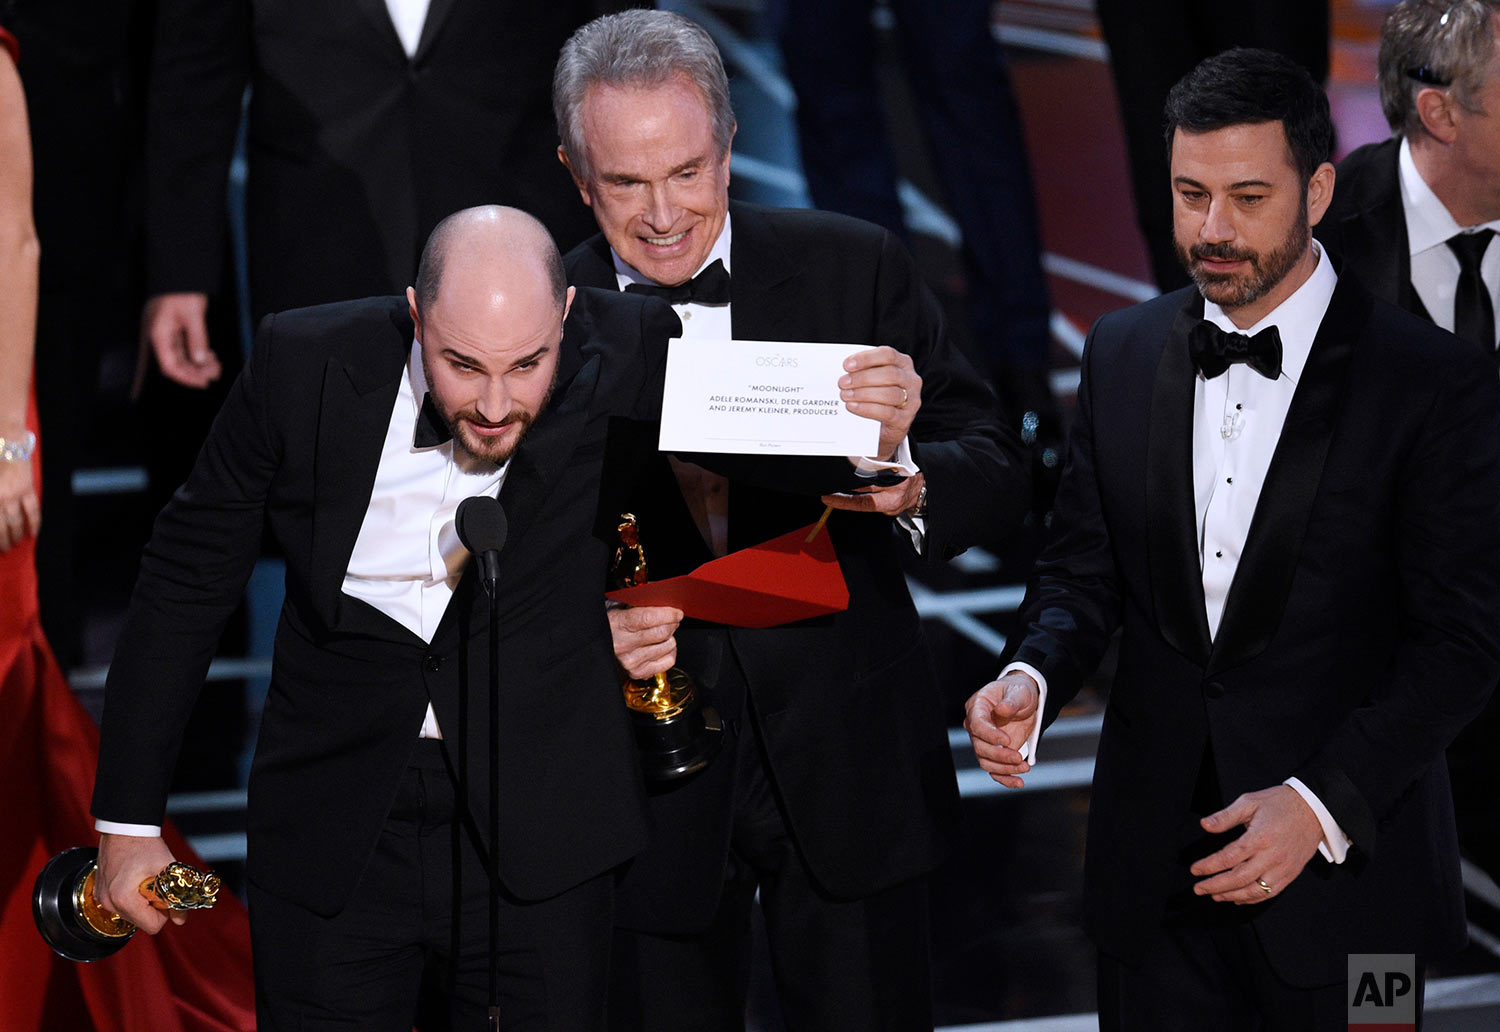  Jordan Horowitz, producer of "La La Land," shows the envelope revealing "Moonlight" as the true winner of best picture at the Oscars on Sunday, Feb. 26, 2017, at the Dolby Theatre in Los Angeles. Presenter Warren Beatty and host Jimmy Kimmel look on